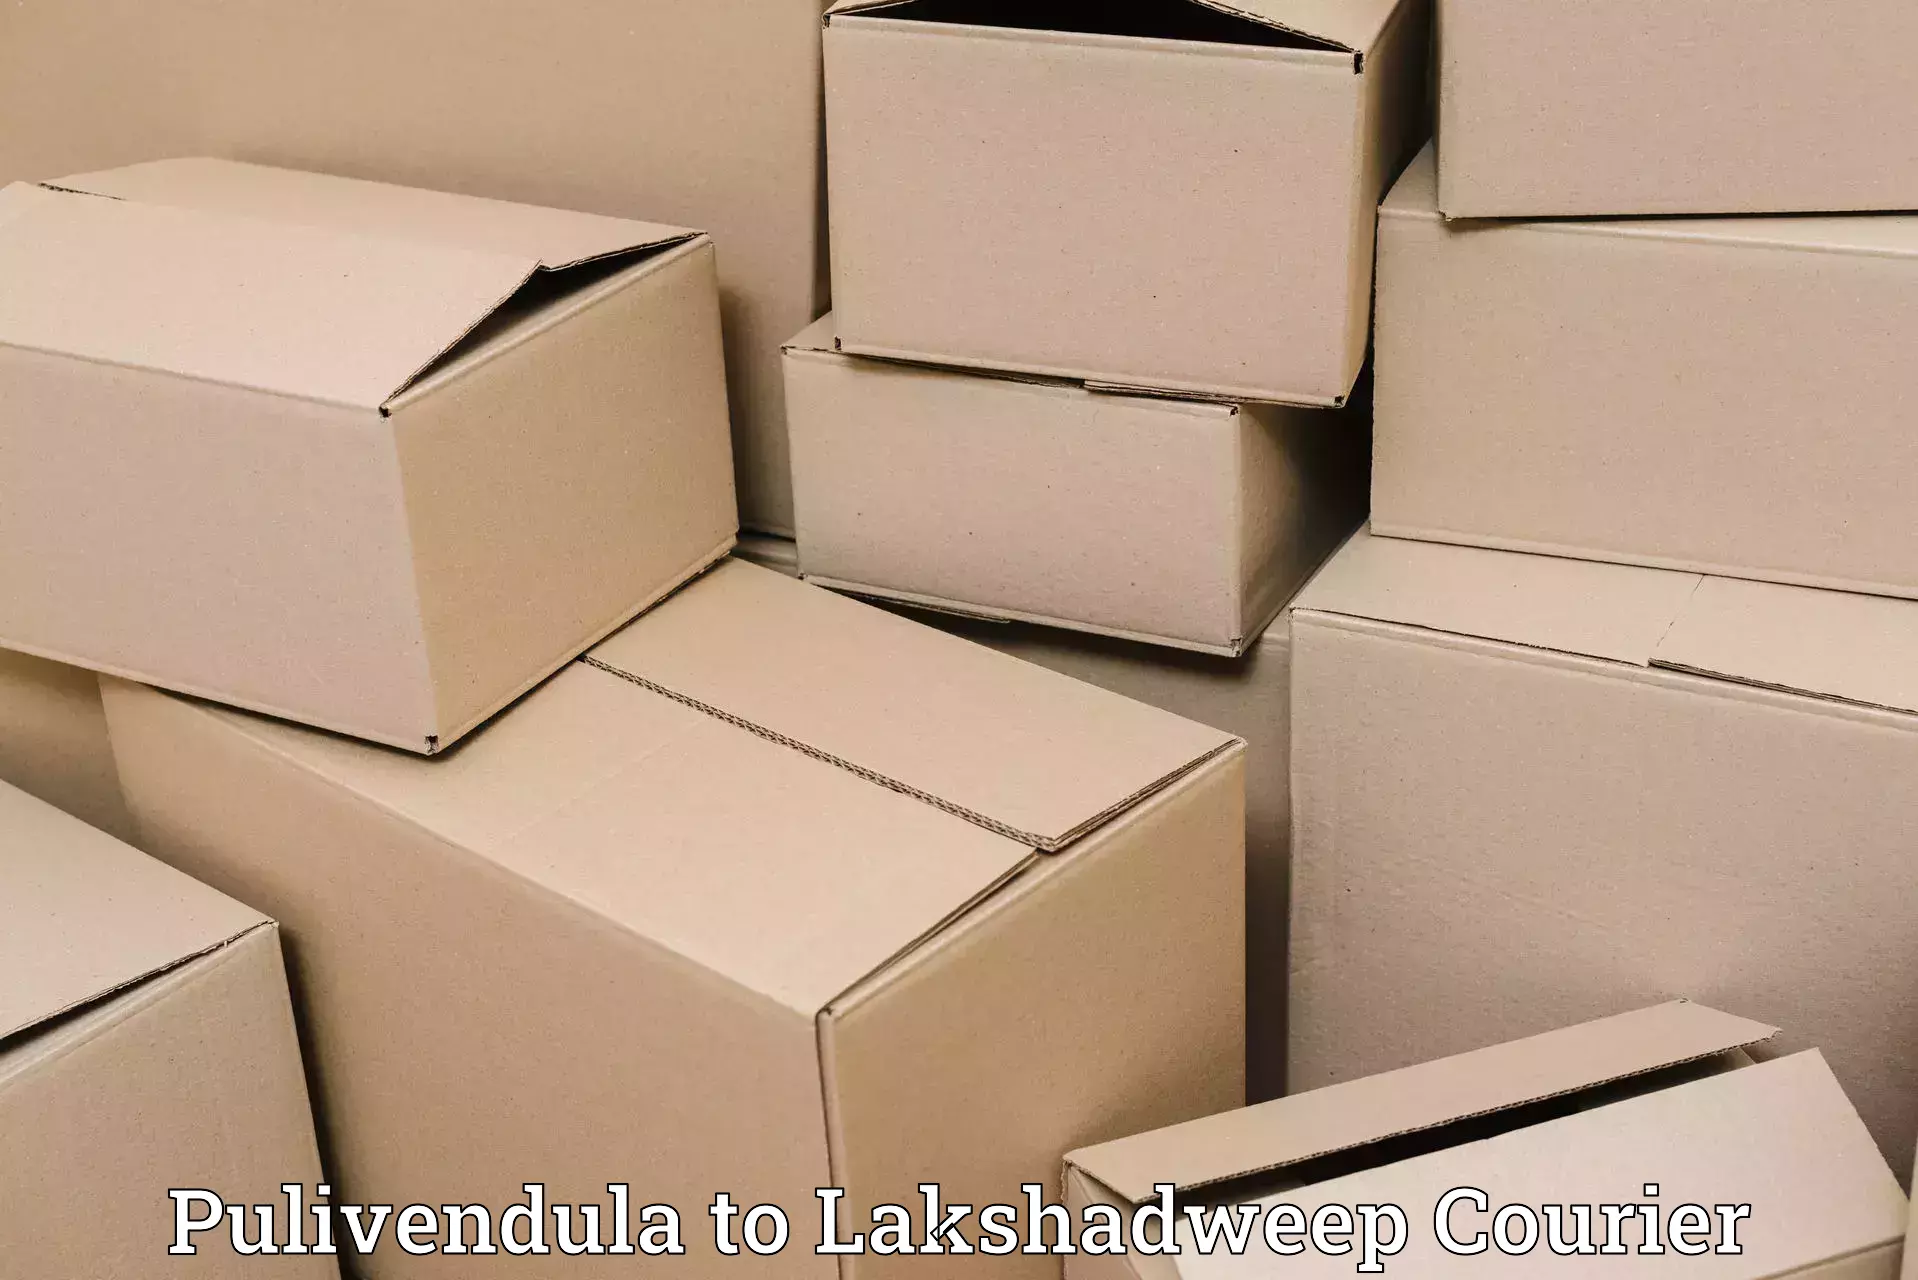 Personal effects shipping in Pulivendula to Lakshadweep